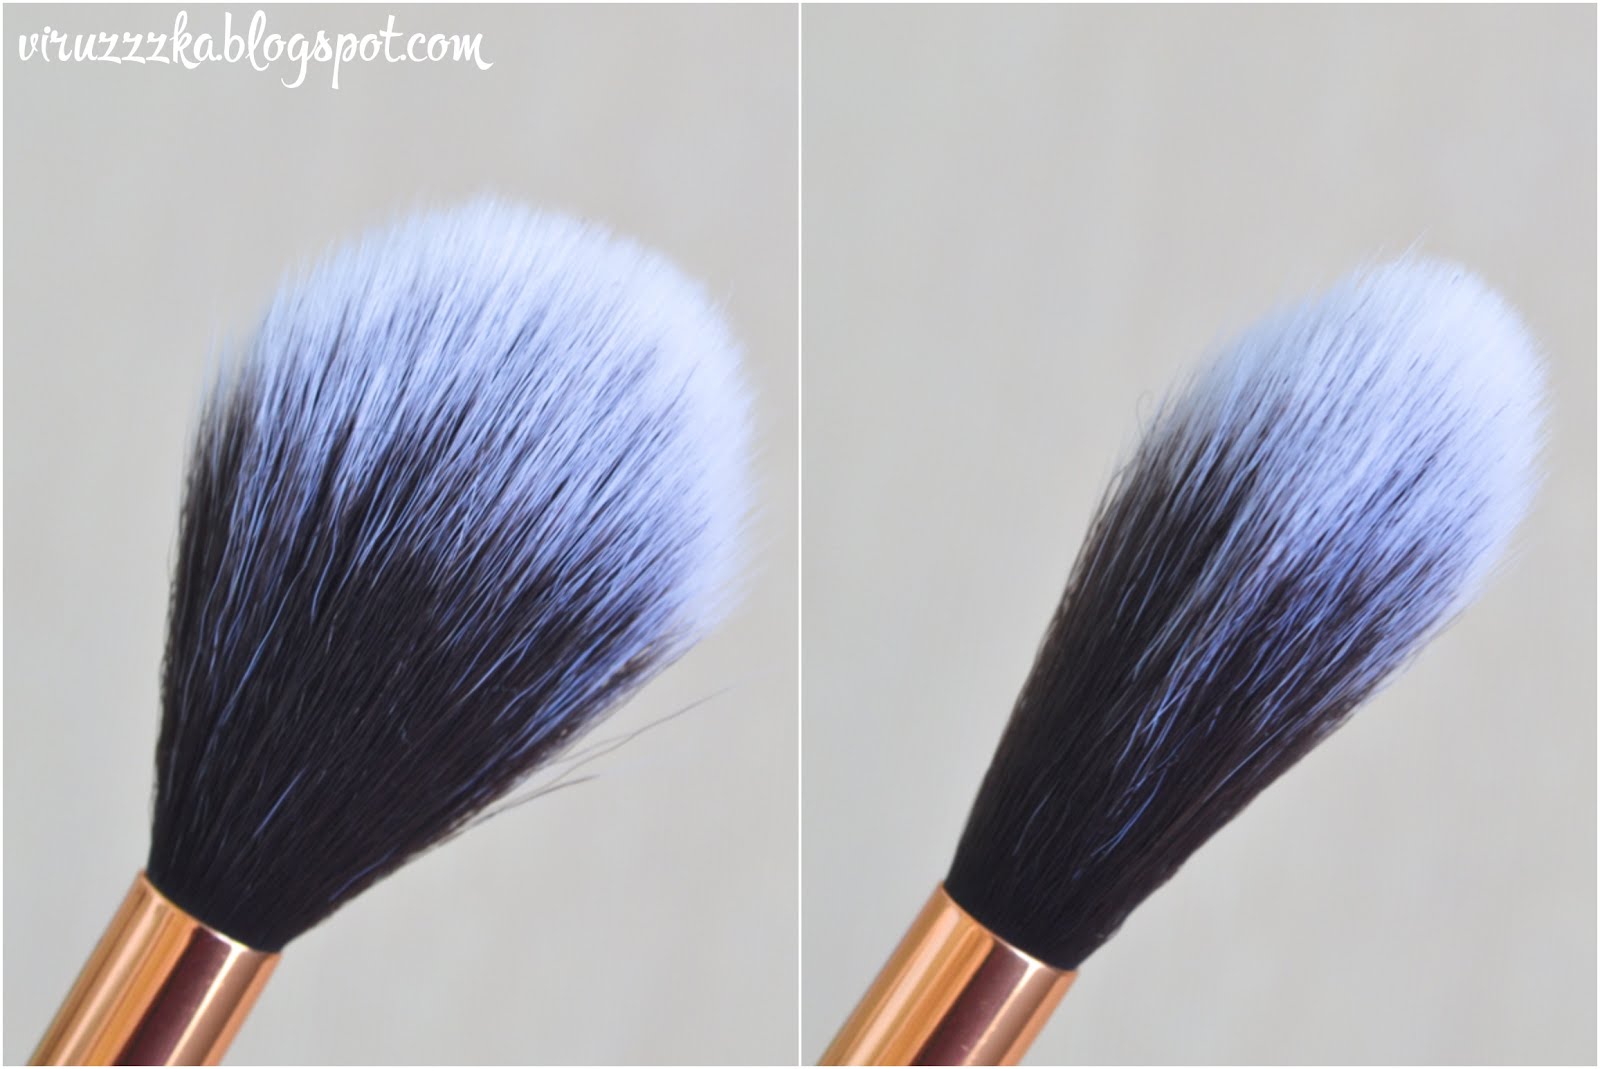 Ipsy Glam Bag LUXIE 640 Pro Precision Tapered Brush in Periwinkle Blue Review Photos 